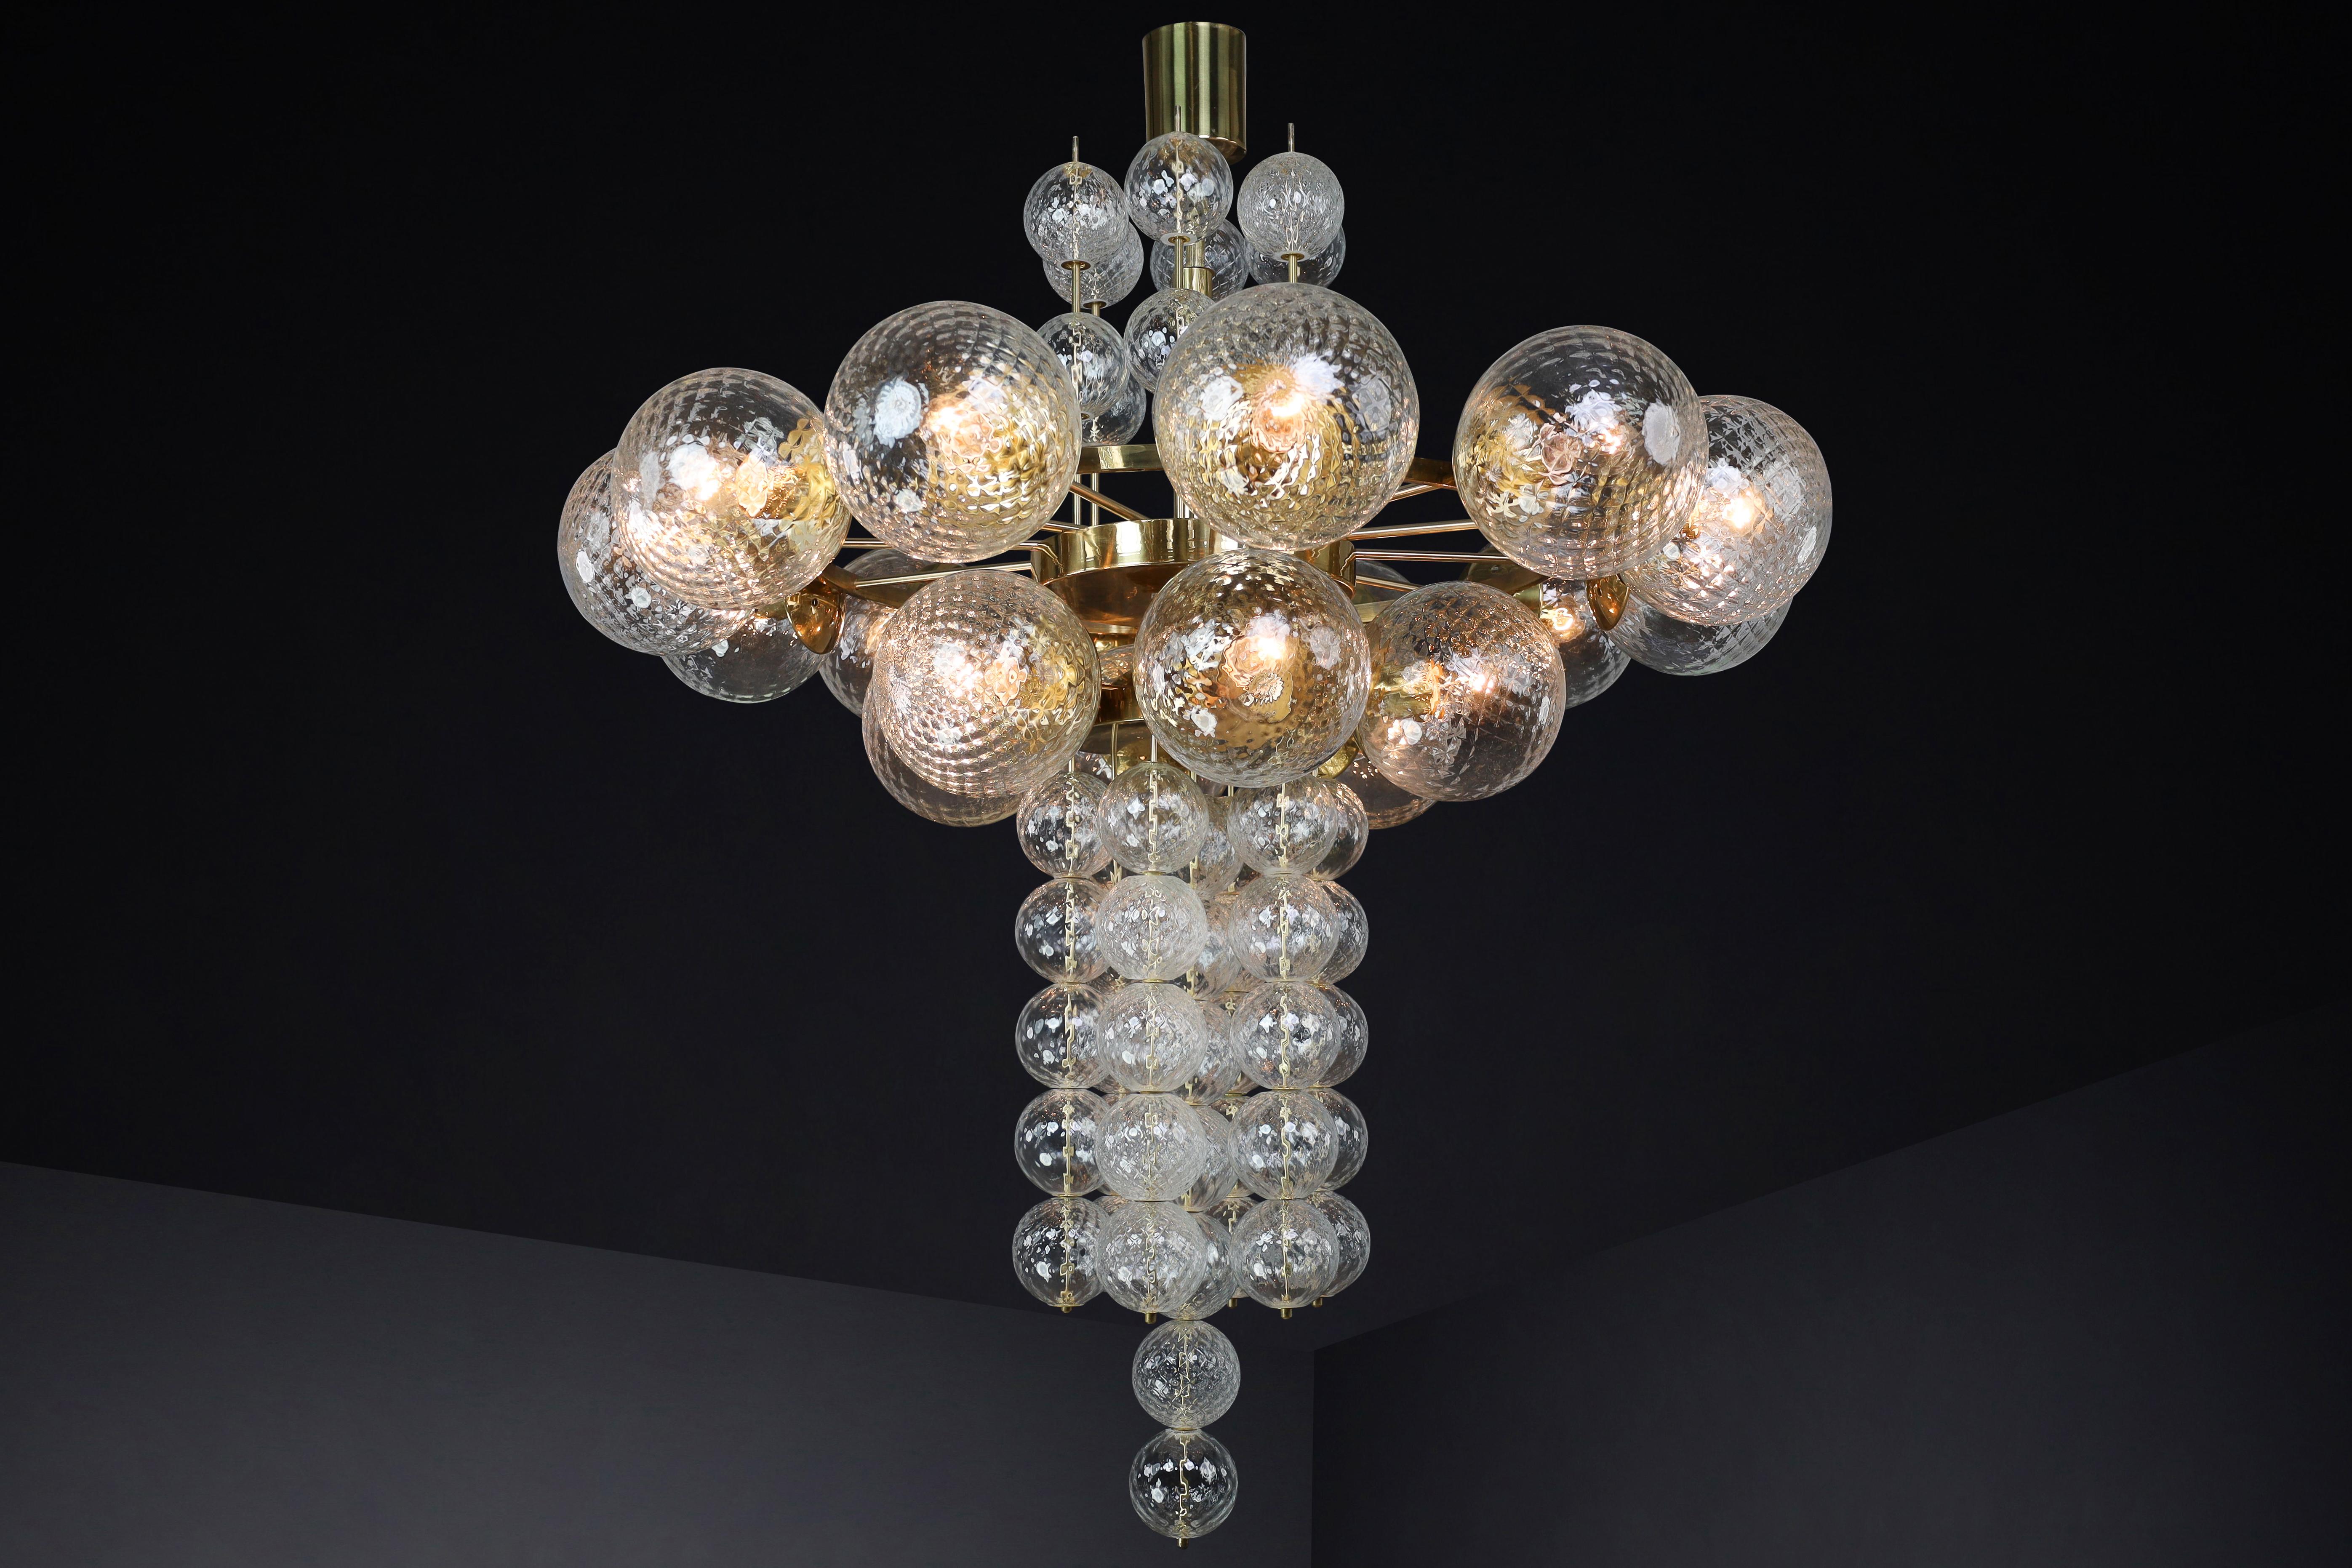 Large Chandelier with brass fixture and hand-blowed glass globes by Preciosa Cz. For Sale 8